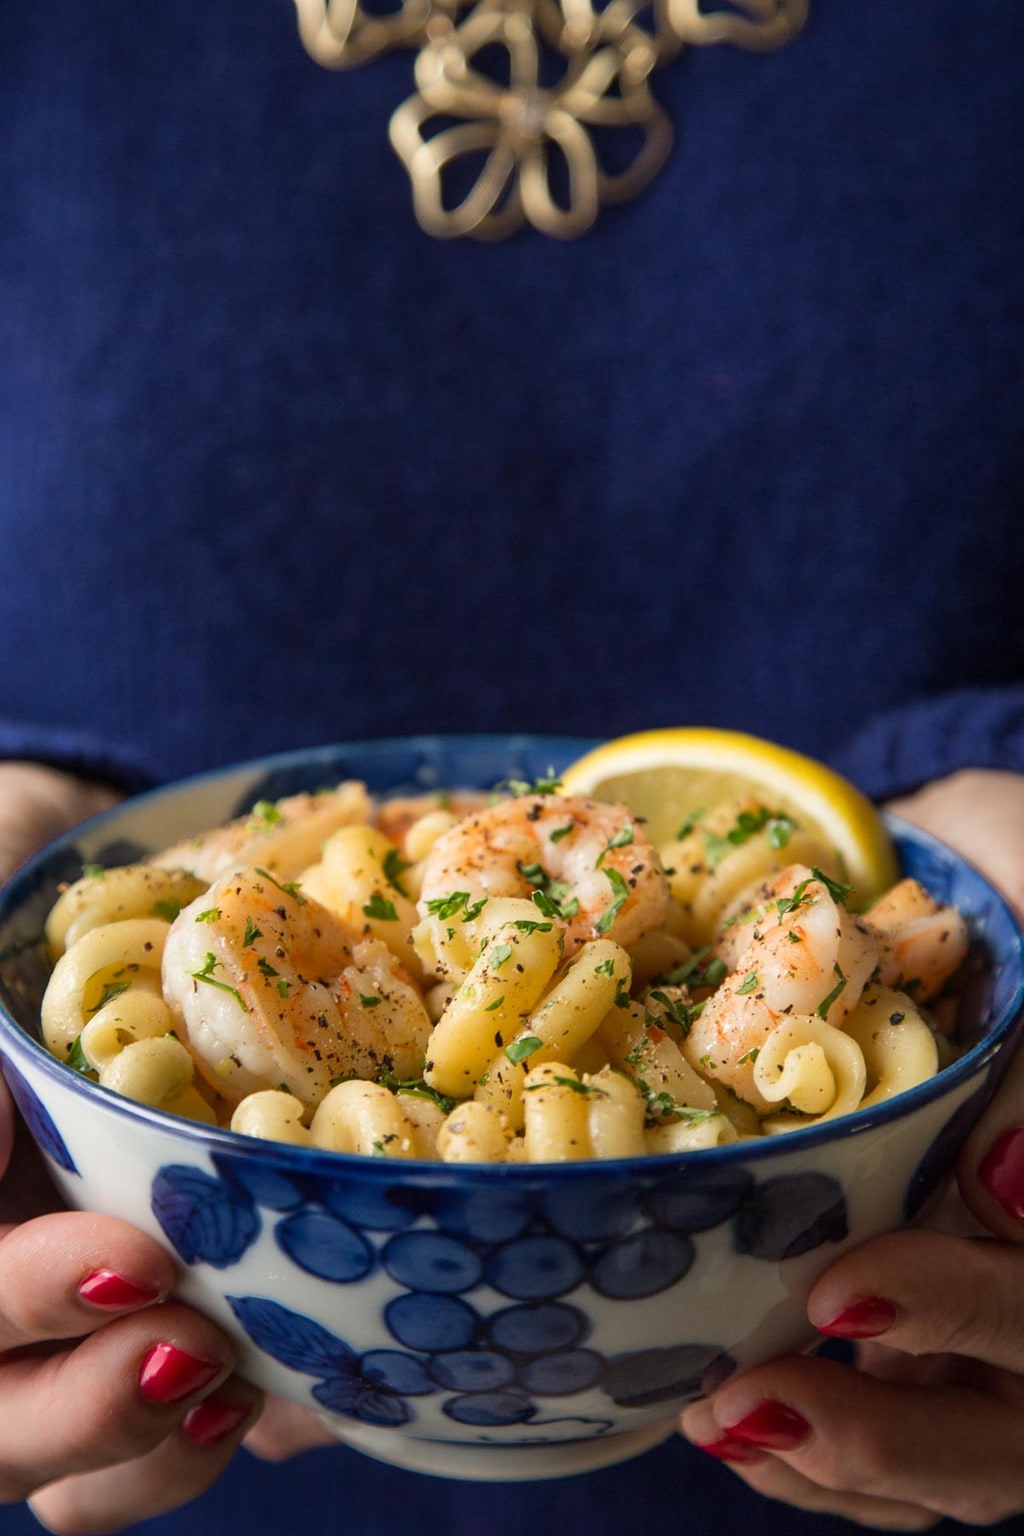 Photo of a woman holding a blue and white patterned bowl of Skillet Pasta Shrimp Scampi.